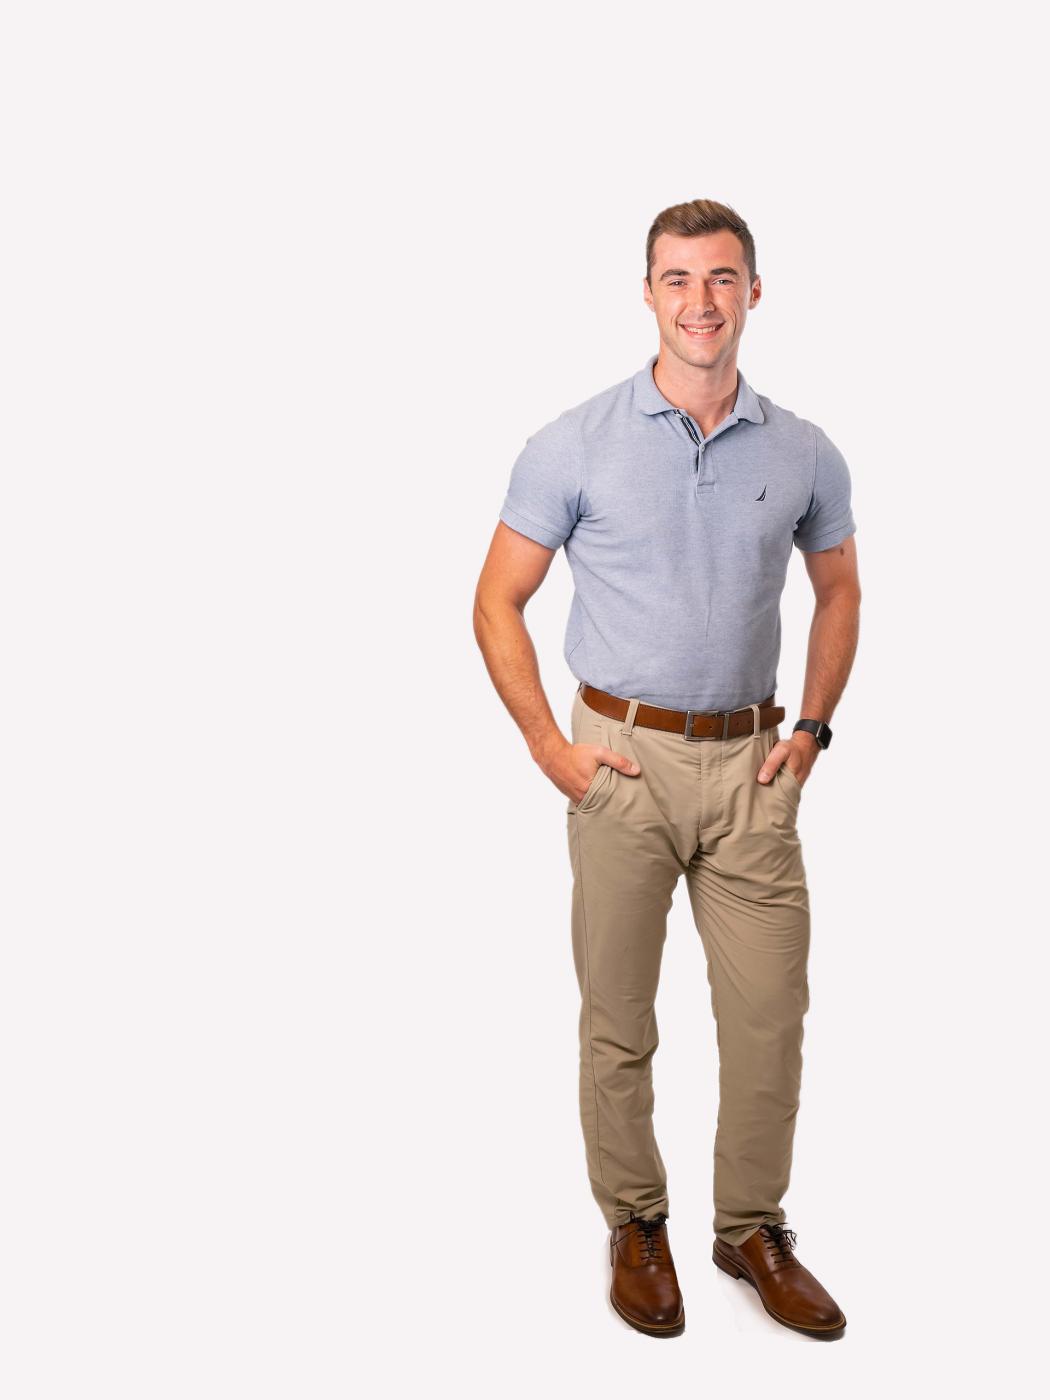 Dr. Connor Pearson, PT, DPT | Rose Physical Therapy Group